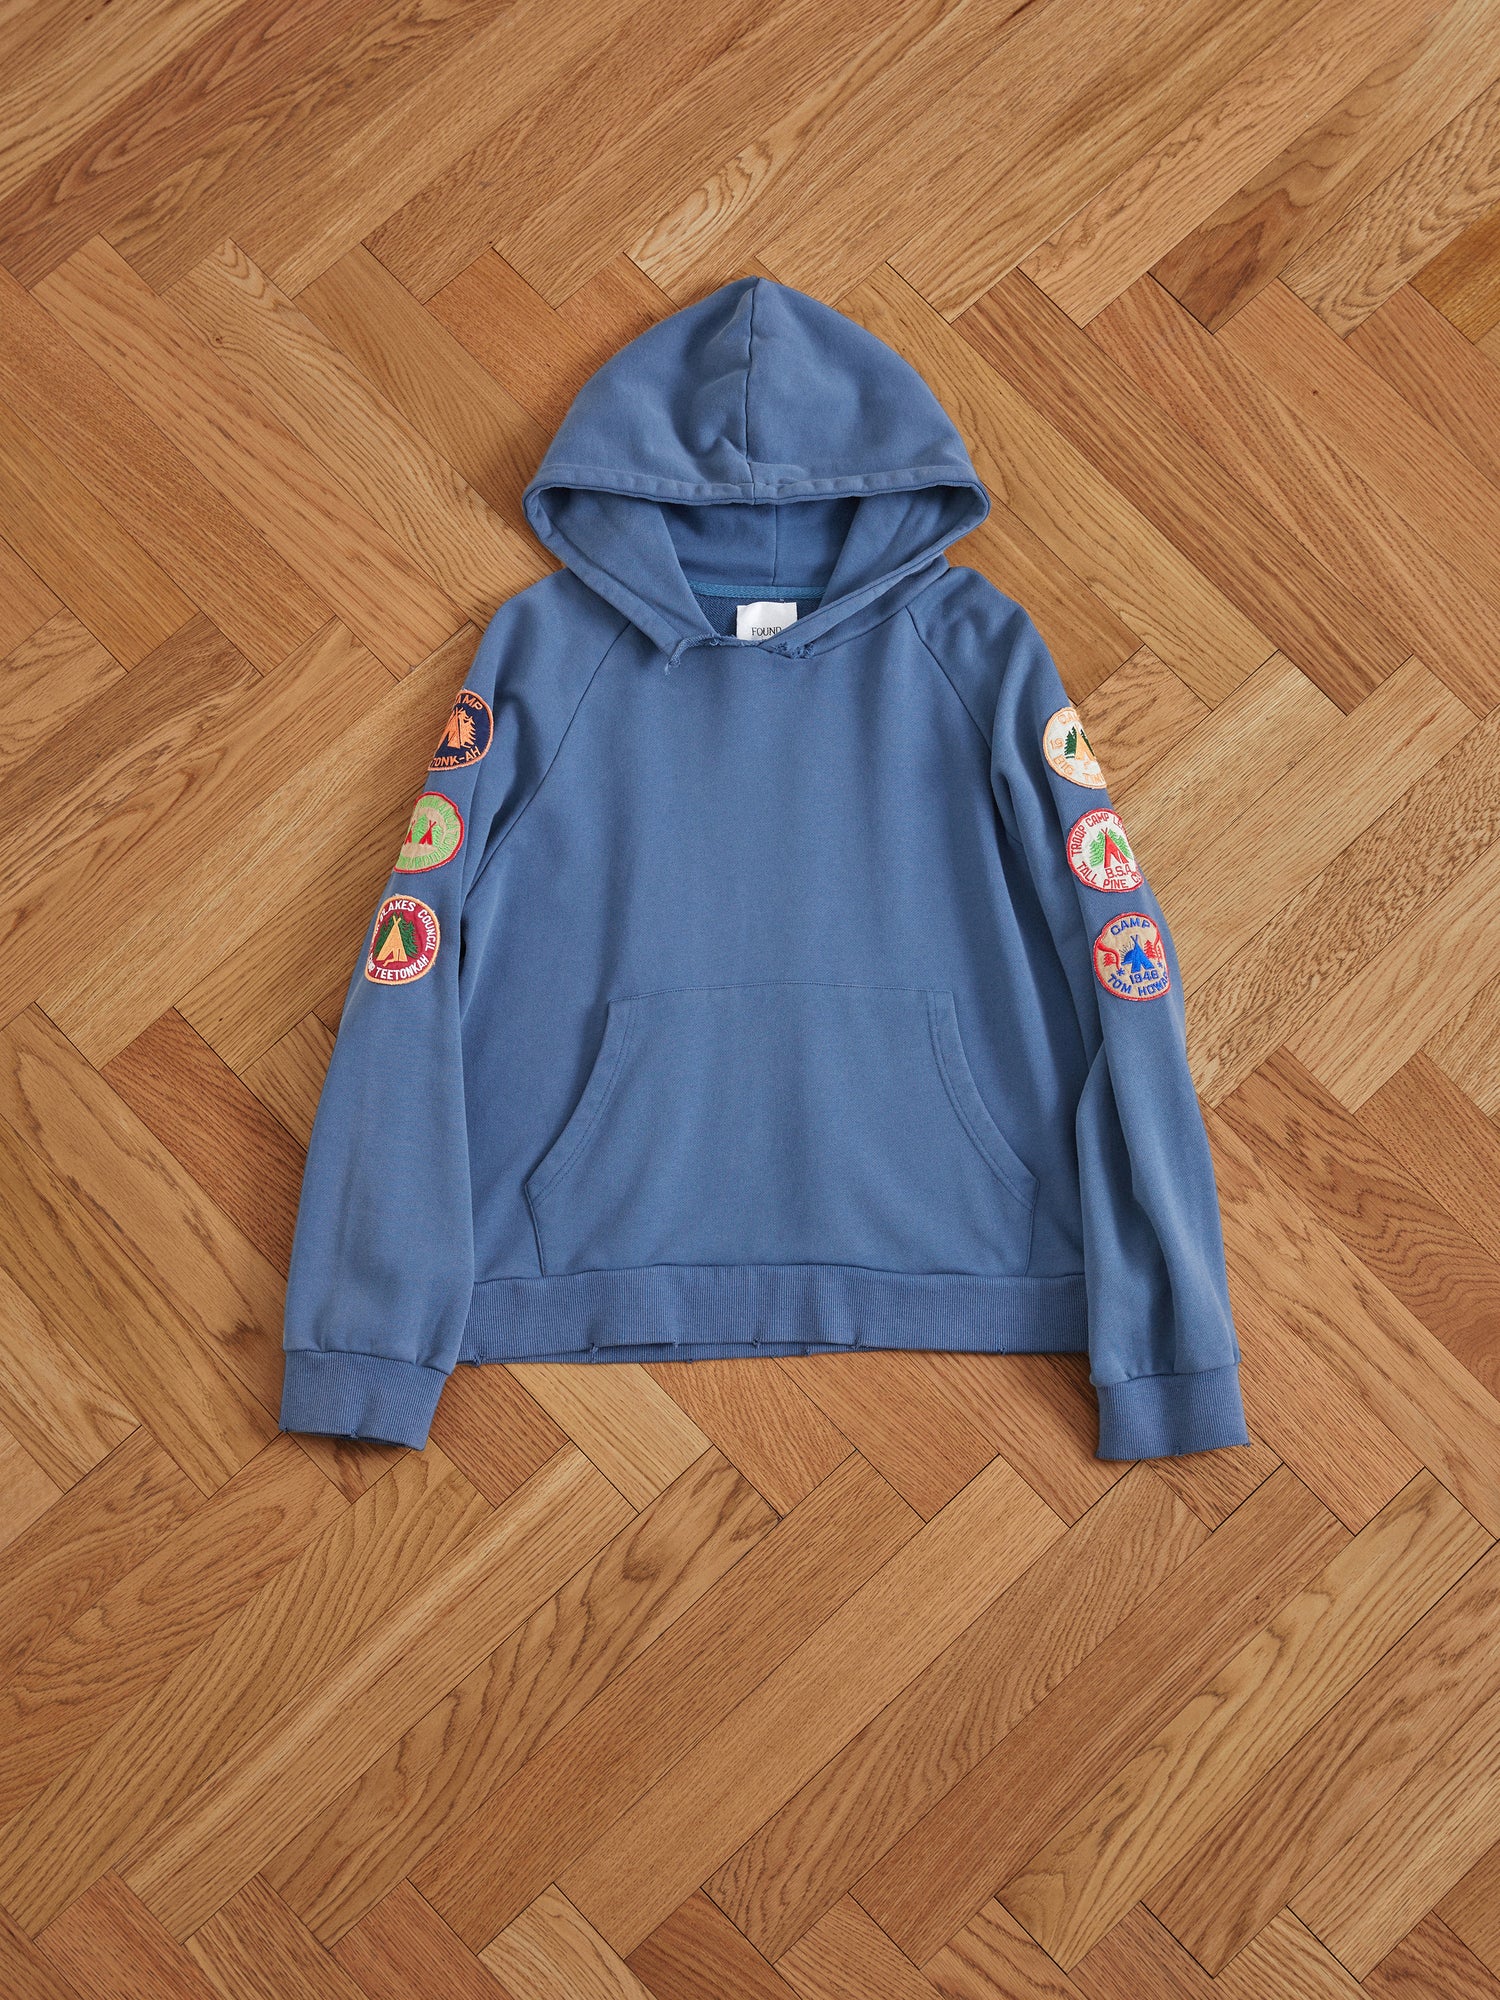 A vintage-inspired Found Timber Campground Hoodie in blue with patches on the front.